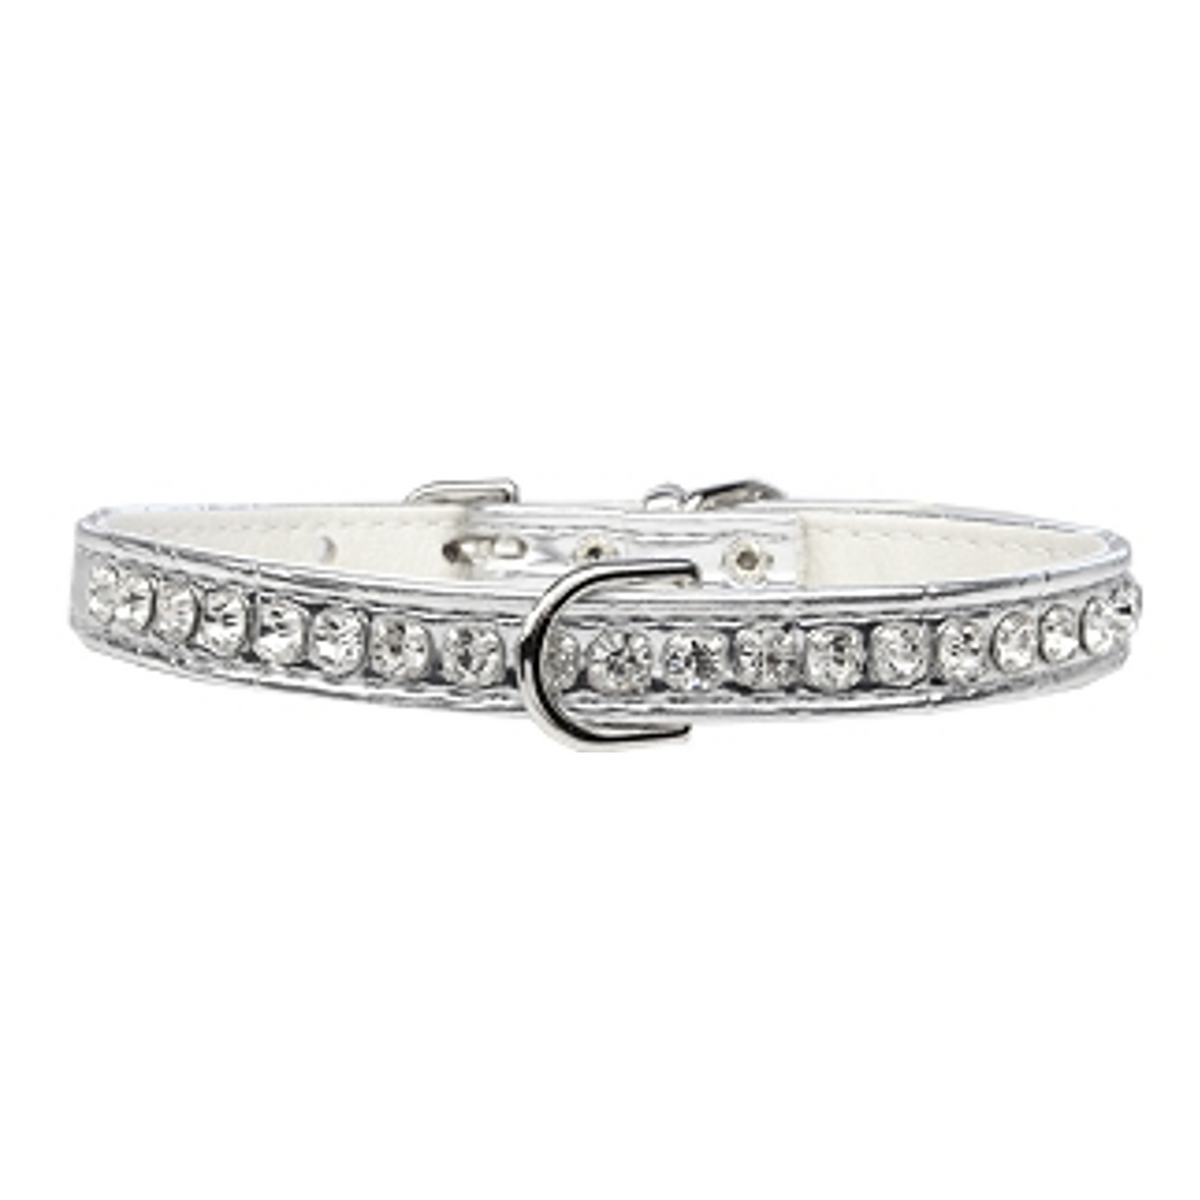 Grace 1-row Crystal Faux Croc Dog Collar - Silver - 3 Red Rovers